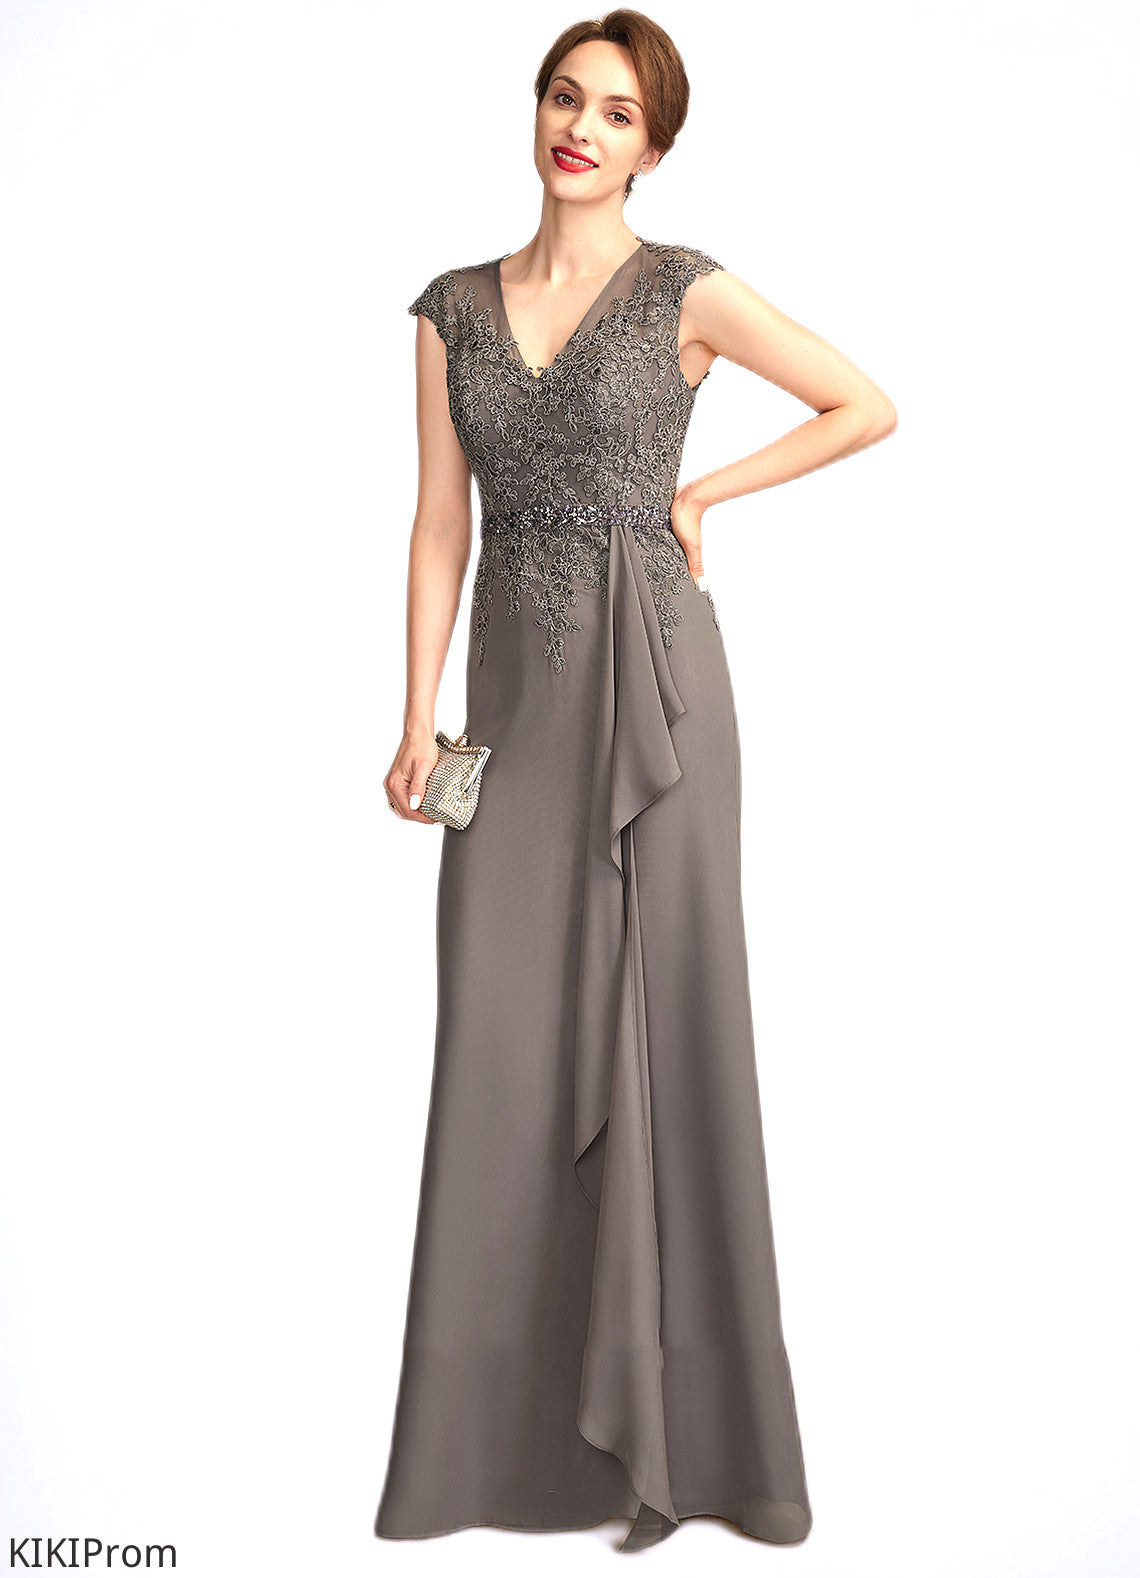 Bridget A-Line V-neck Floor-Length Chiffon Lace Mother of the Bride Dress With Beading Sequins Cascading Ruffles DZ126P0015030